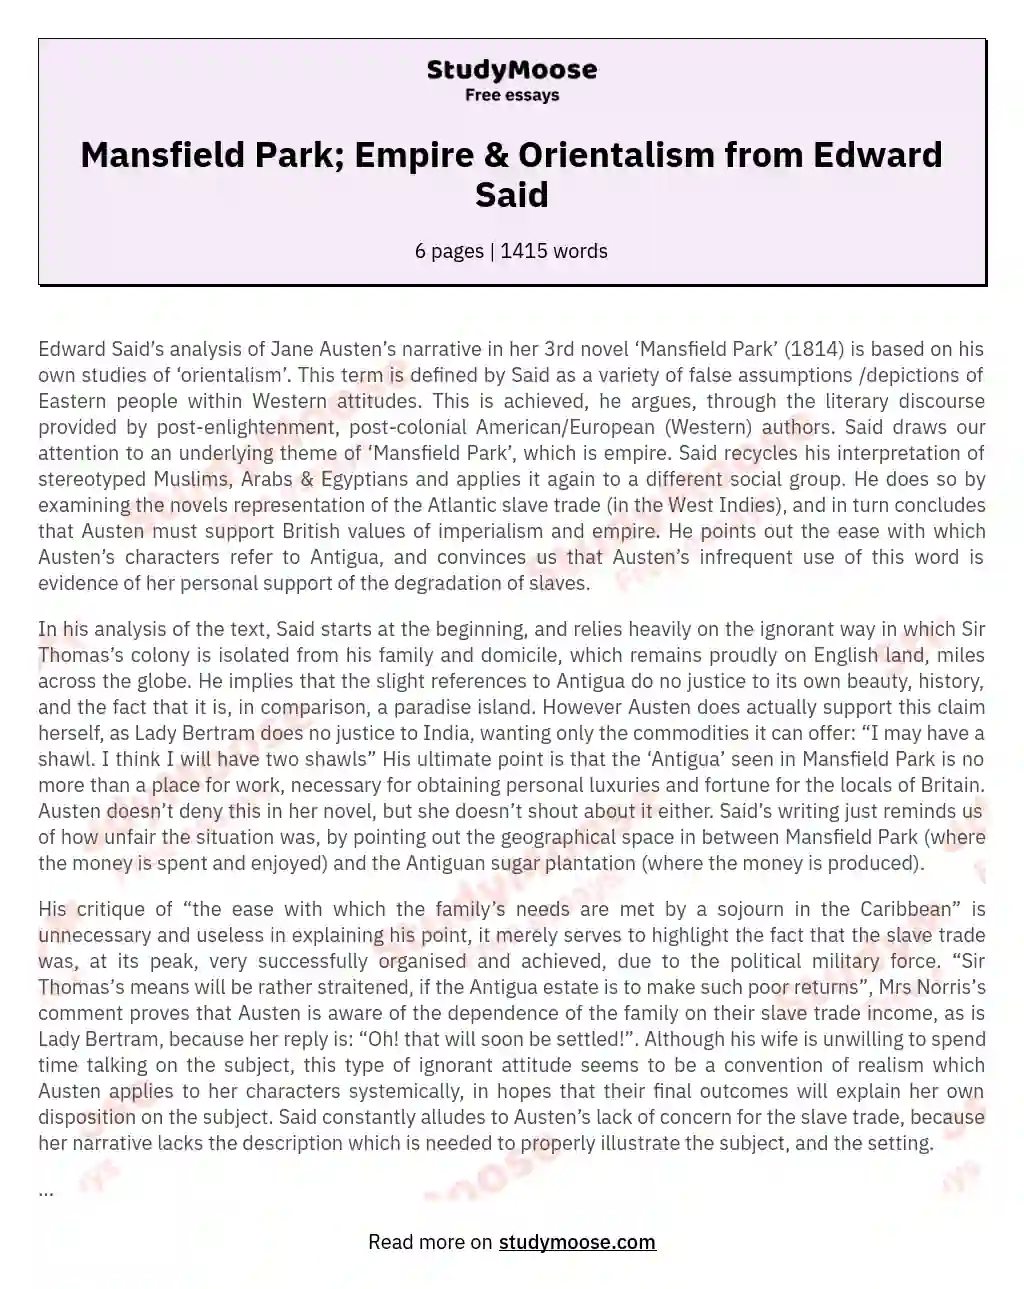 Mansfield Park; Empire & Orientalism from Edward Said